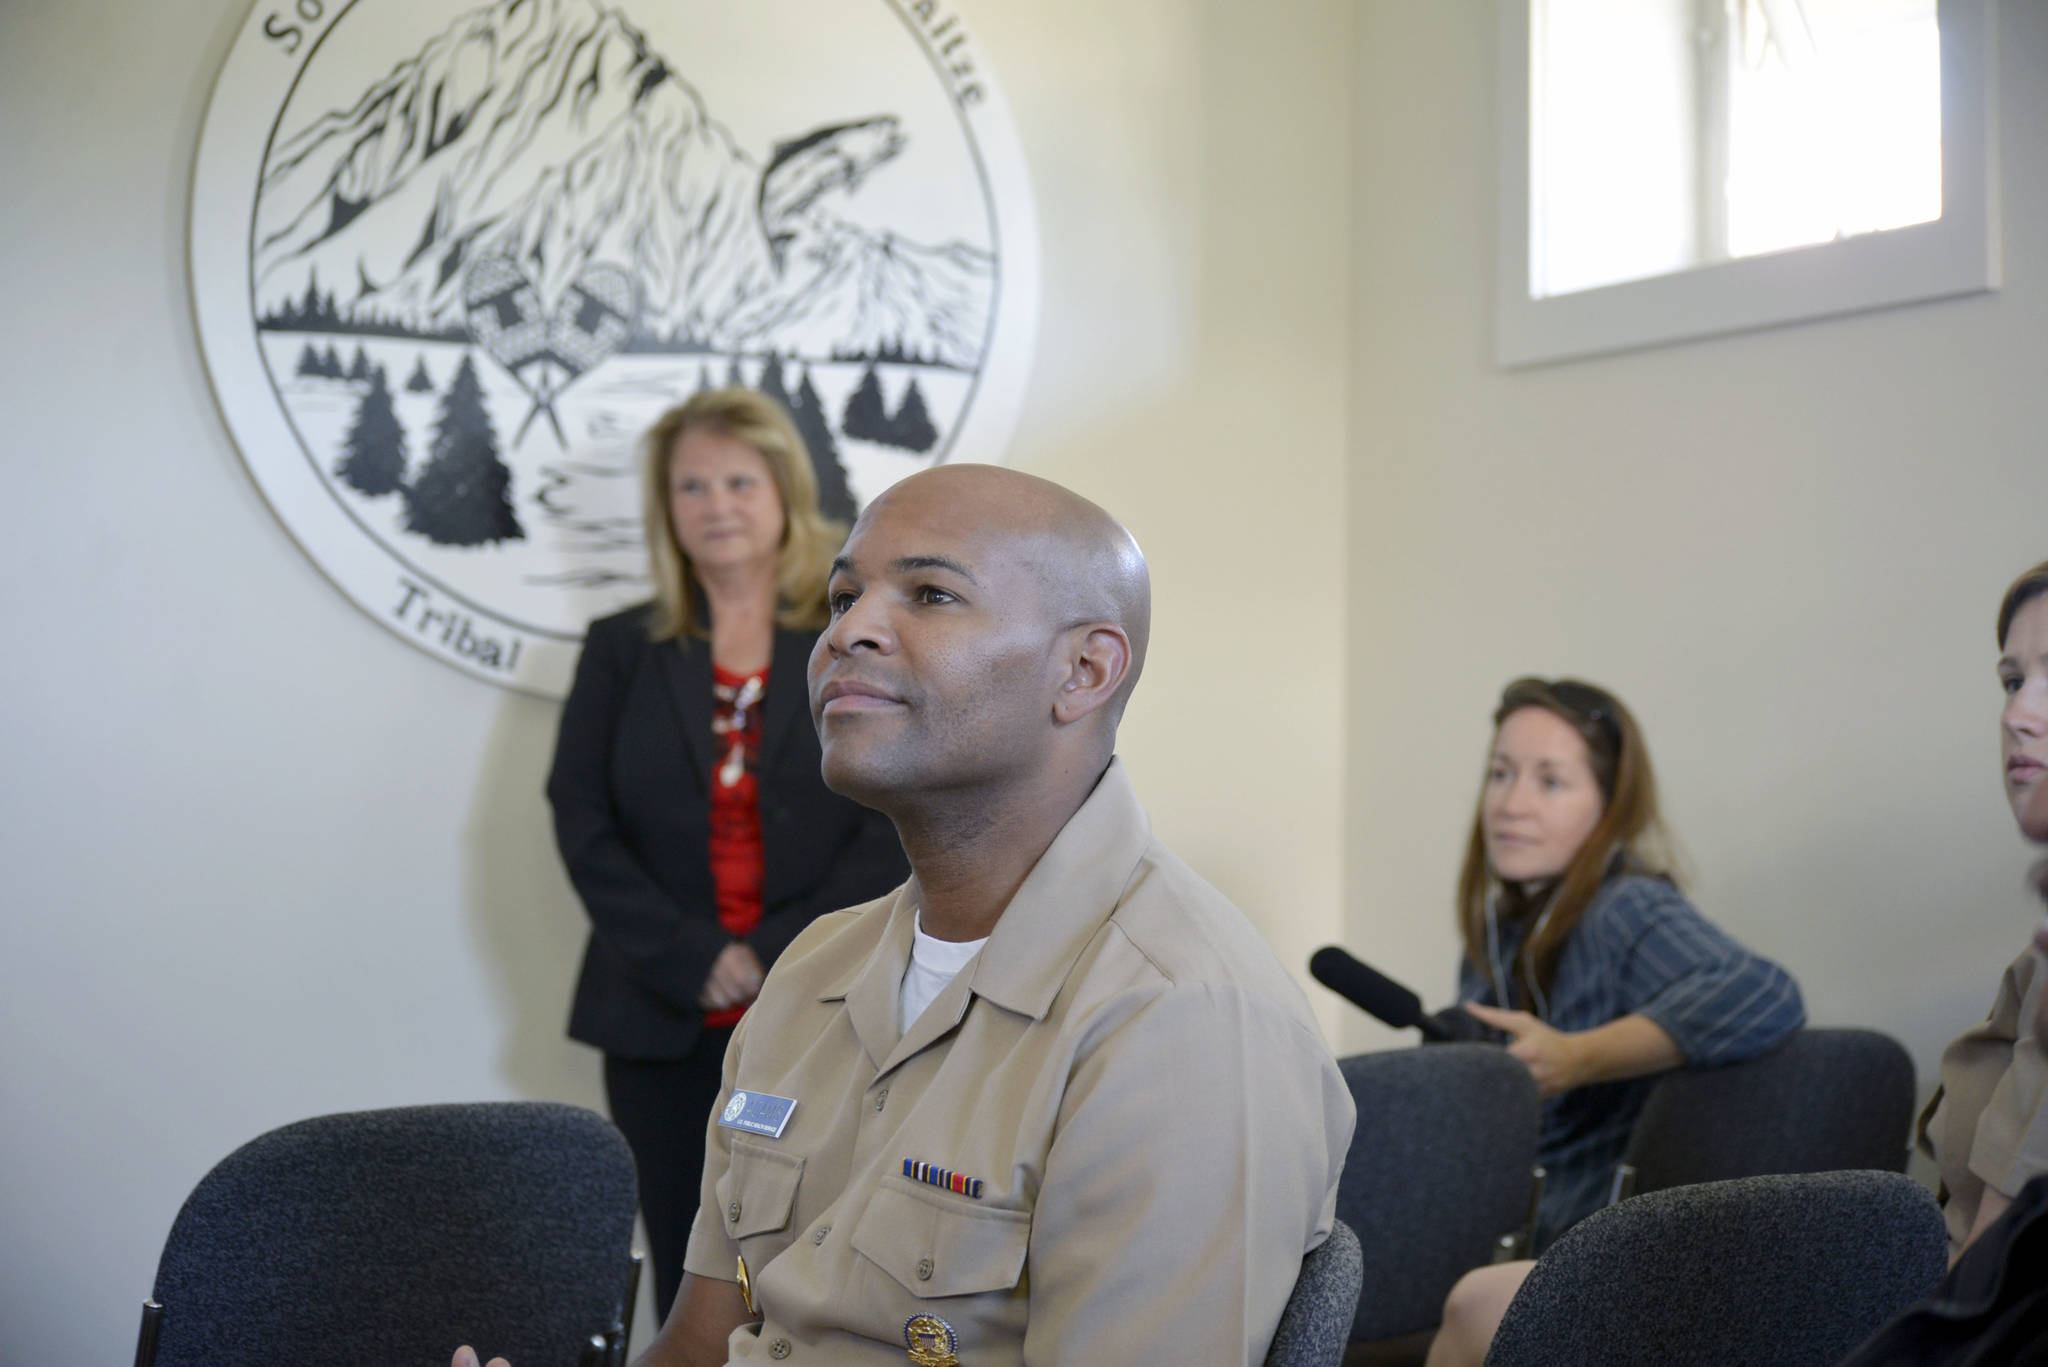 Surgeon general tours Dena’ina Wellness Center as part of statewide tour